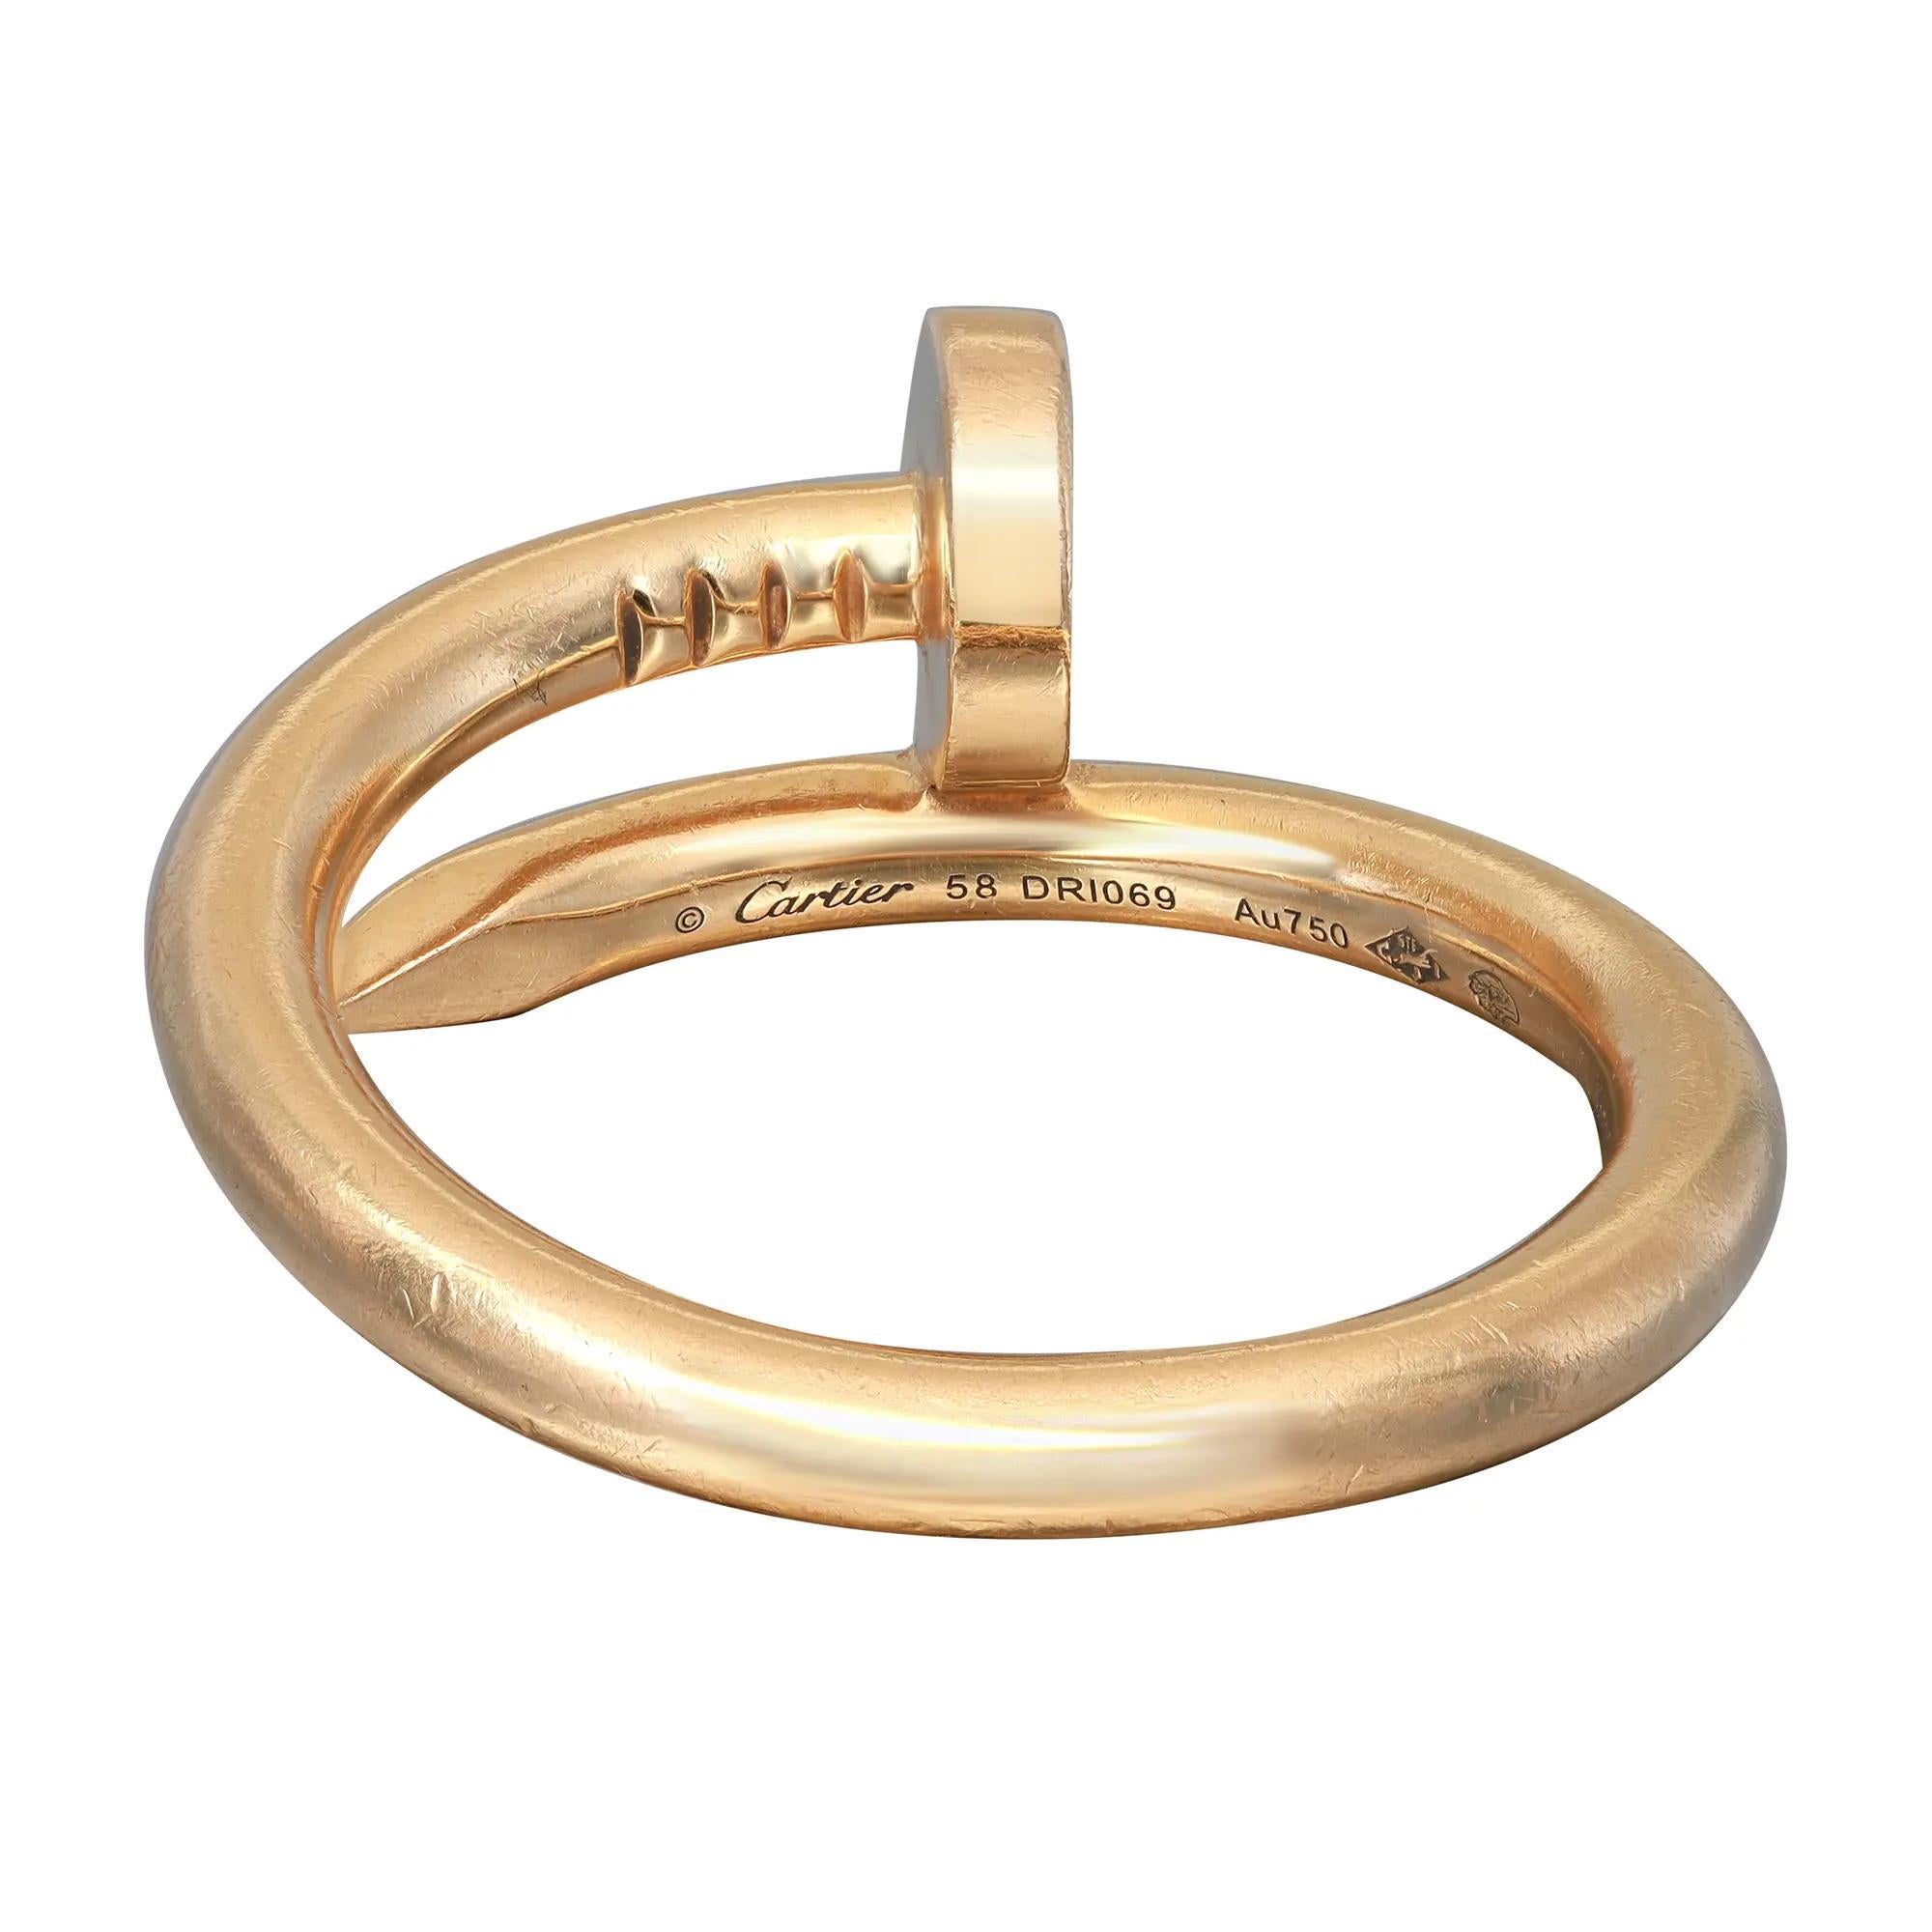 Cartier Juste un Clou ring, crafted in 18K yellow gold. Width: 2.65 mm. Ring size 58 US 8. Total weight: 8.03 grams. Excellent preowned condition. Original box and paper are not included. Comes with Chronostore appraisal and a presentable gift box. 